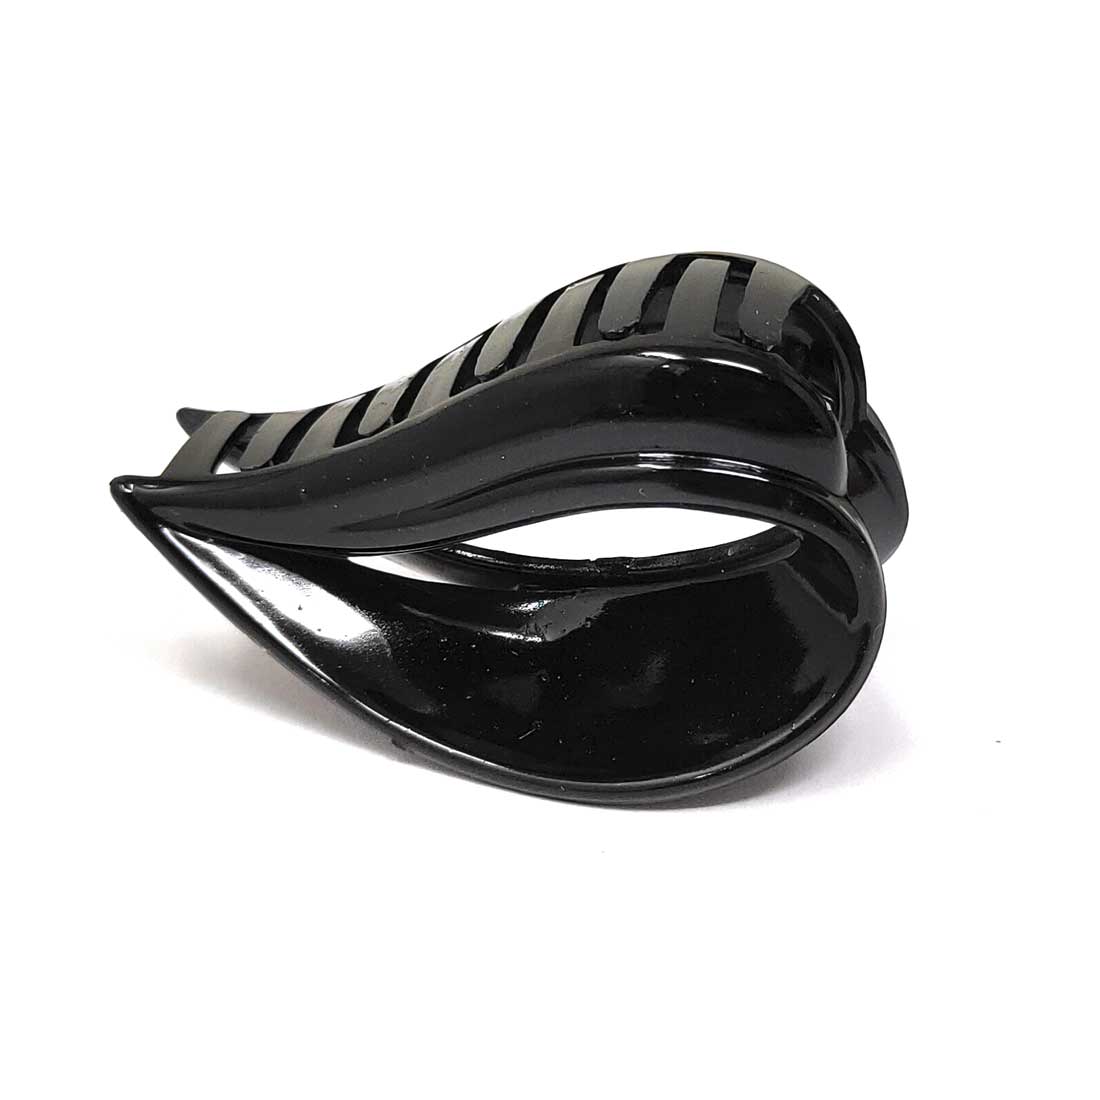 Anokhi Ada Leaf Plastic Hair Clutcher/Hair Claw Clip for Girls and Women (Black, Pack of 2) - 01-04C